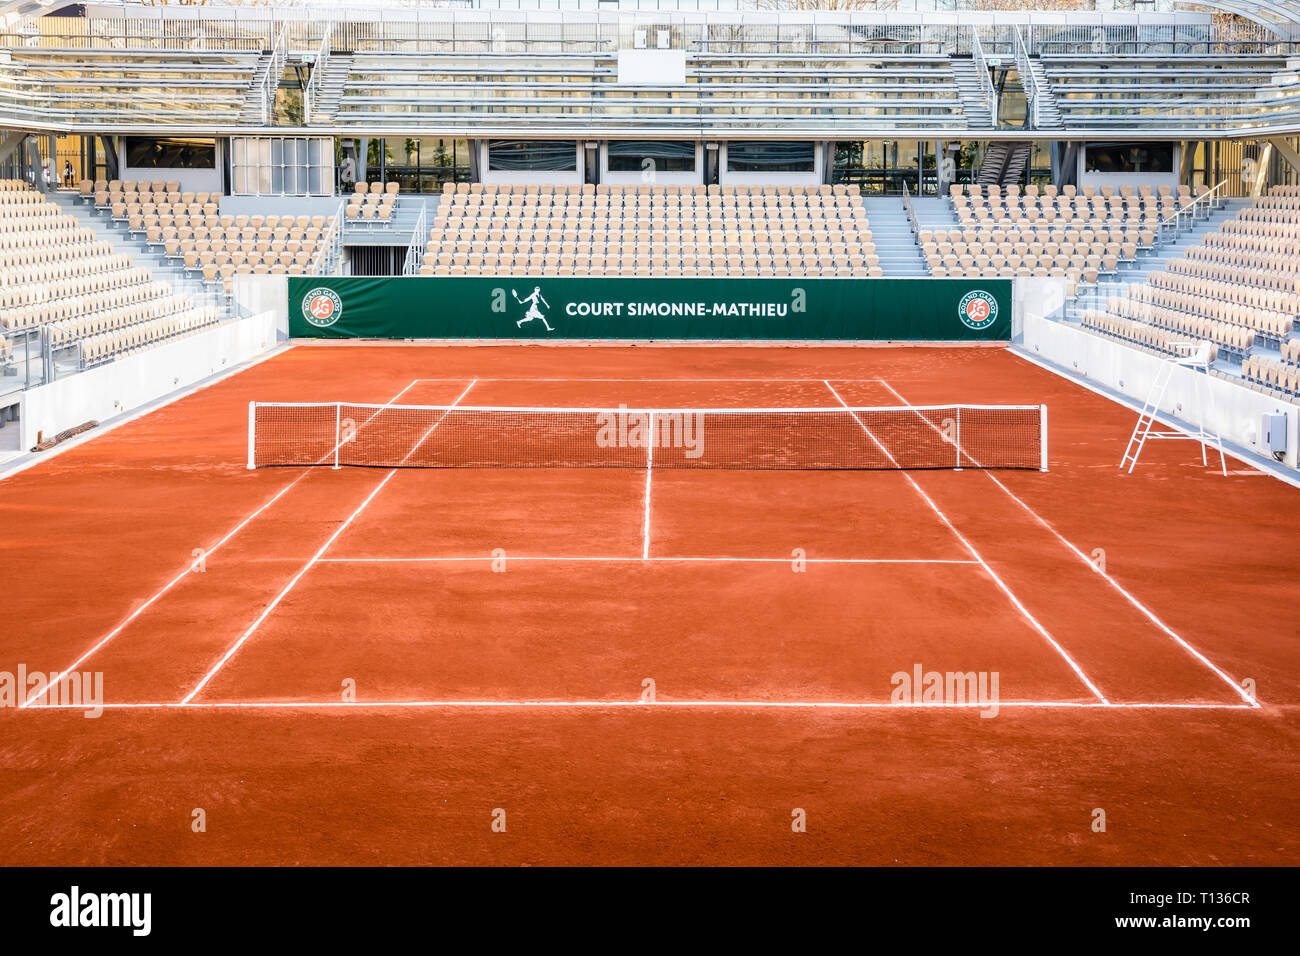 General view of the Simonne Mathieu tennis clay court, the latest of Roland Garros stadium in Paris, where the French Open takes place. Stock Photo